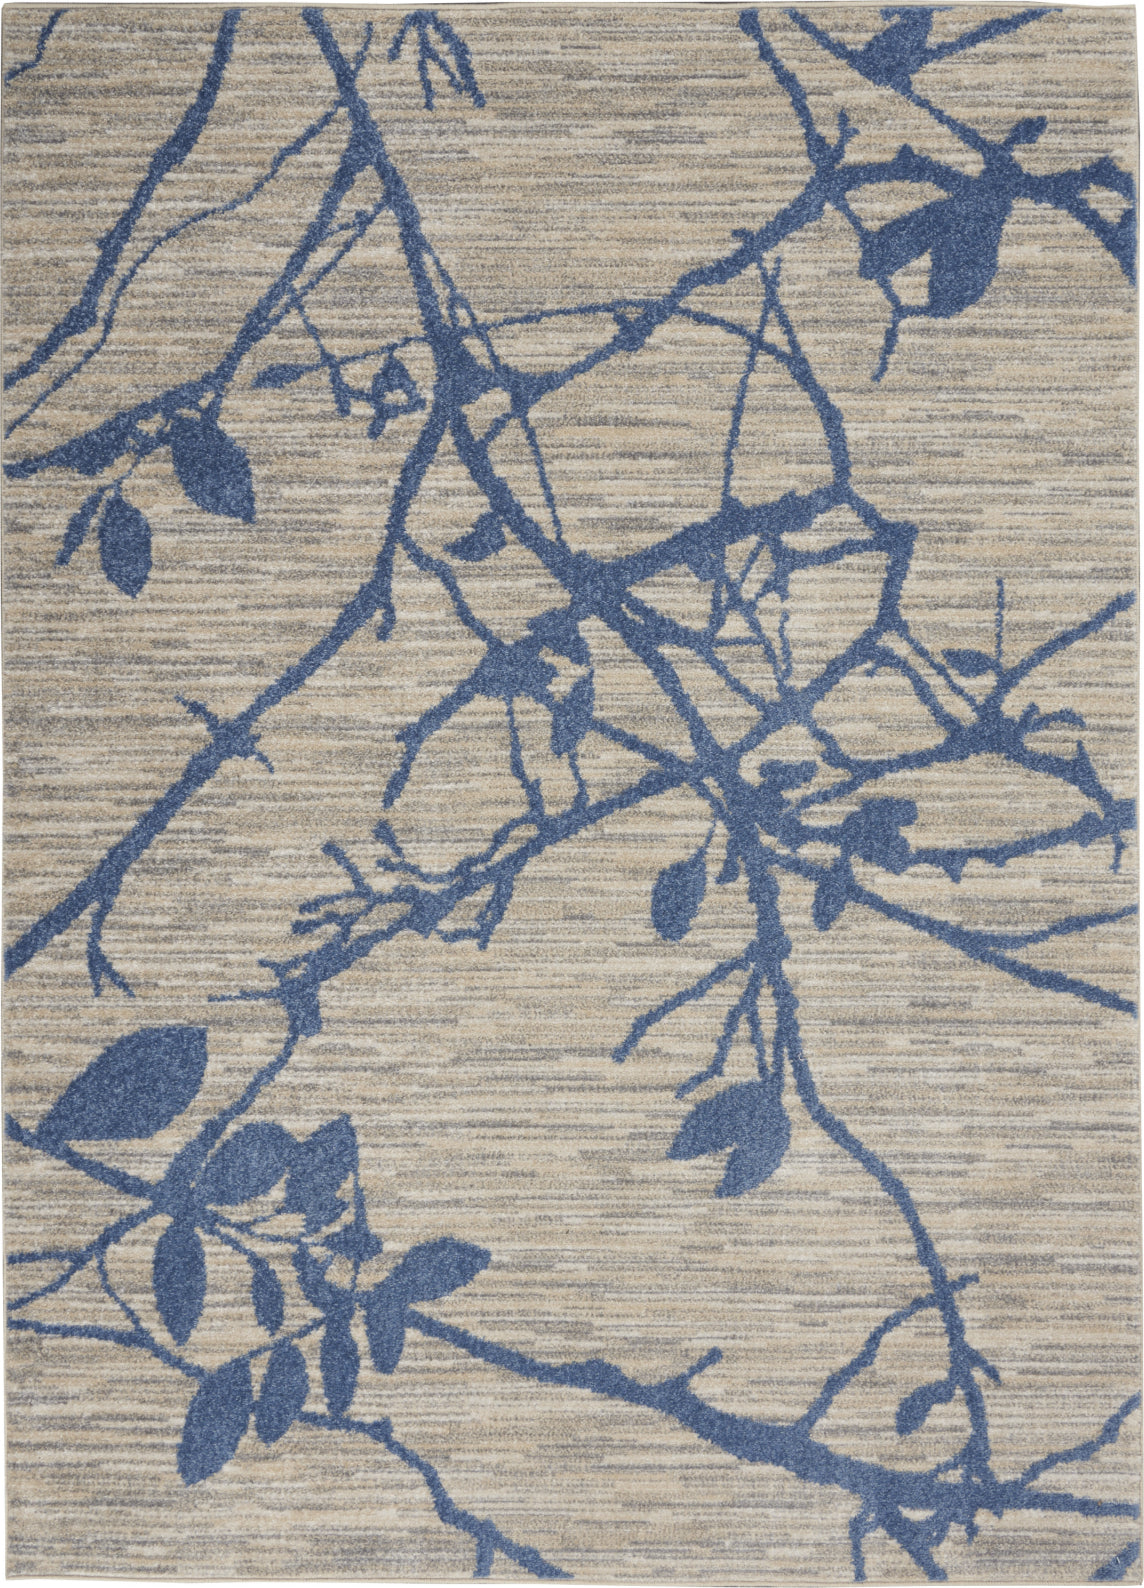 Rug CK001 Calvin RFV02 – and River Incredible Blue Flow Area Decor Rugs Klein Teal/Ivory